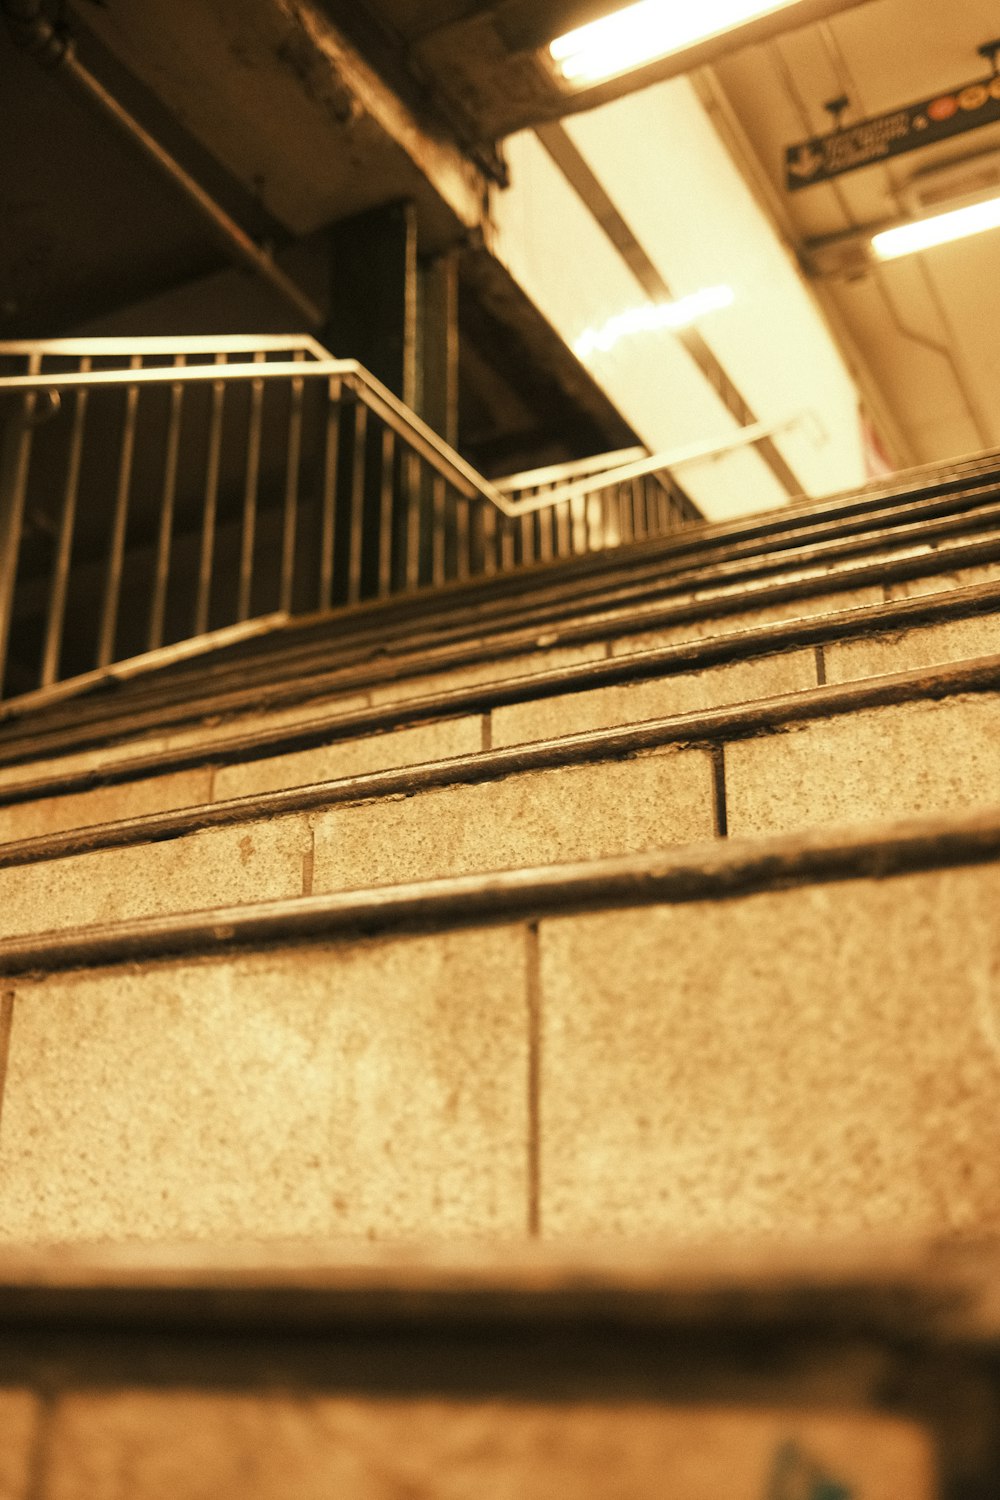 a stair case in a building with metal railings